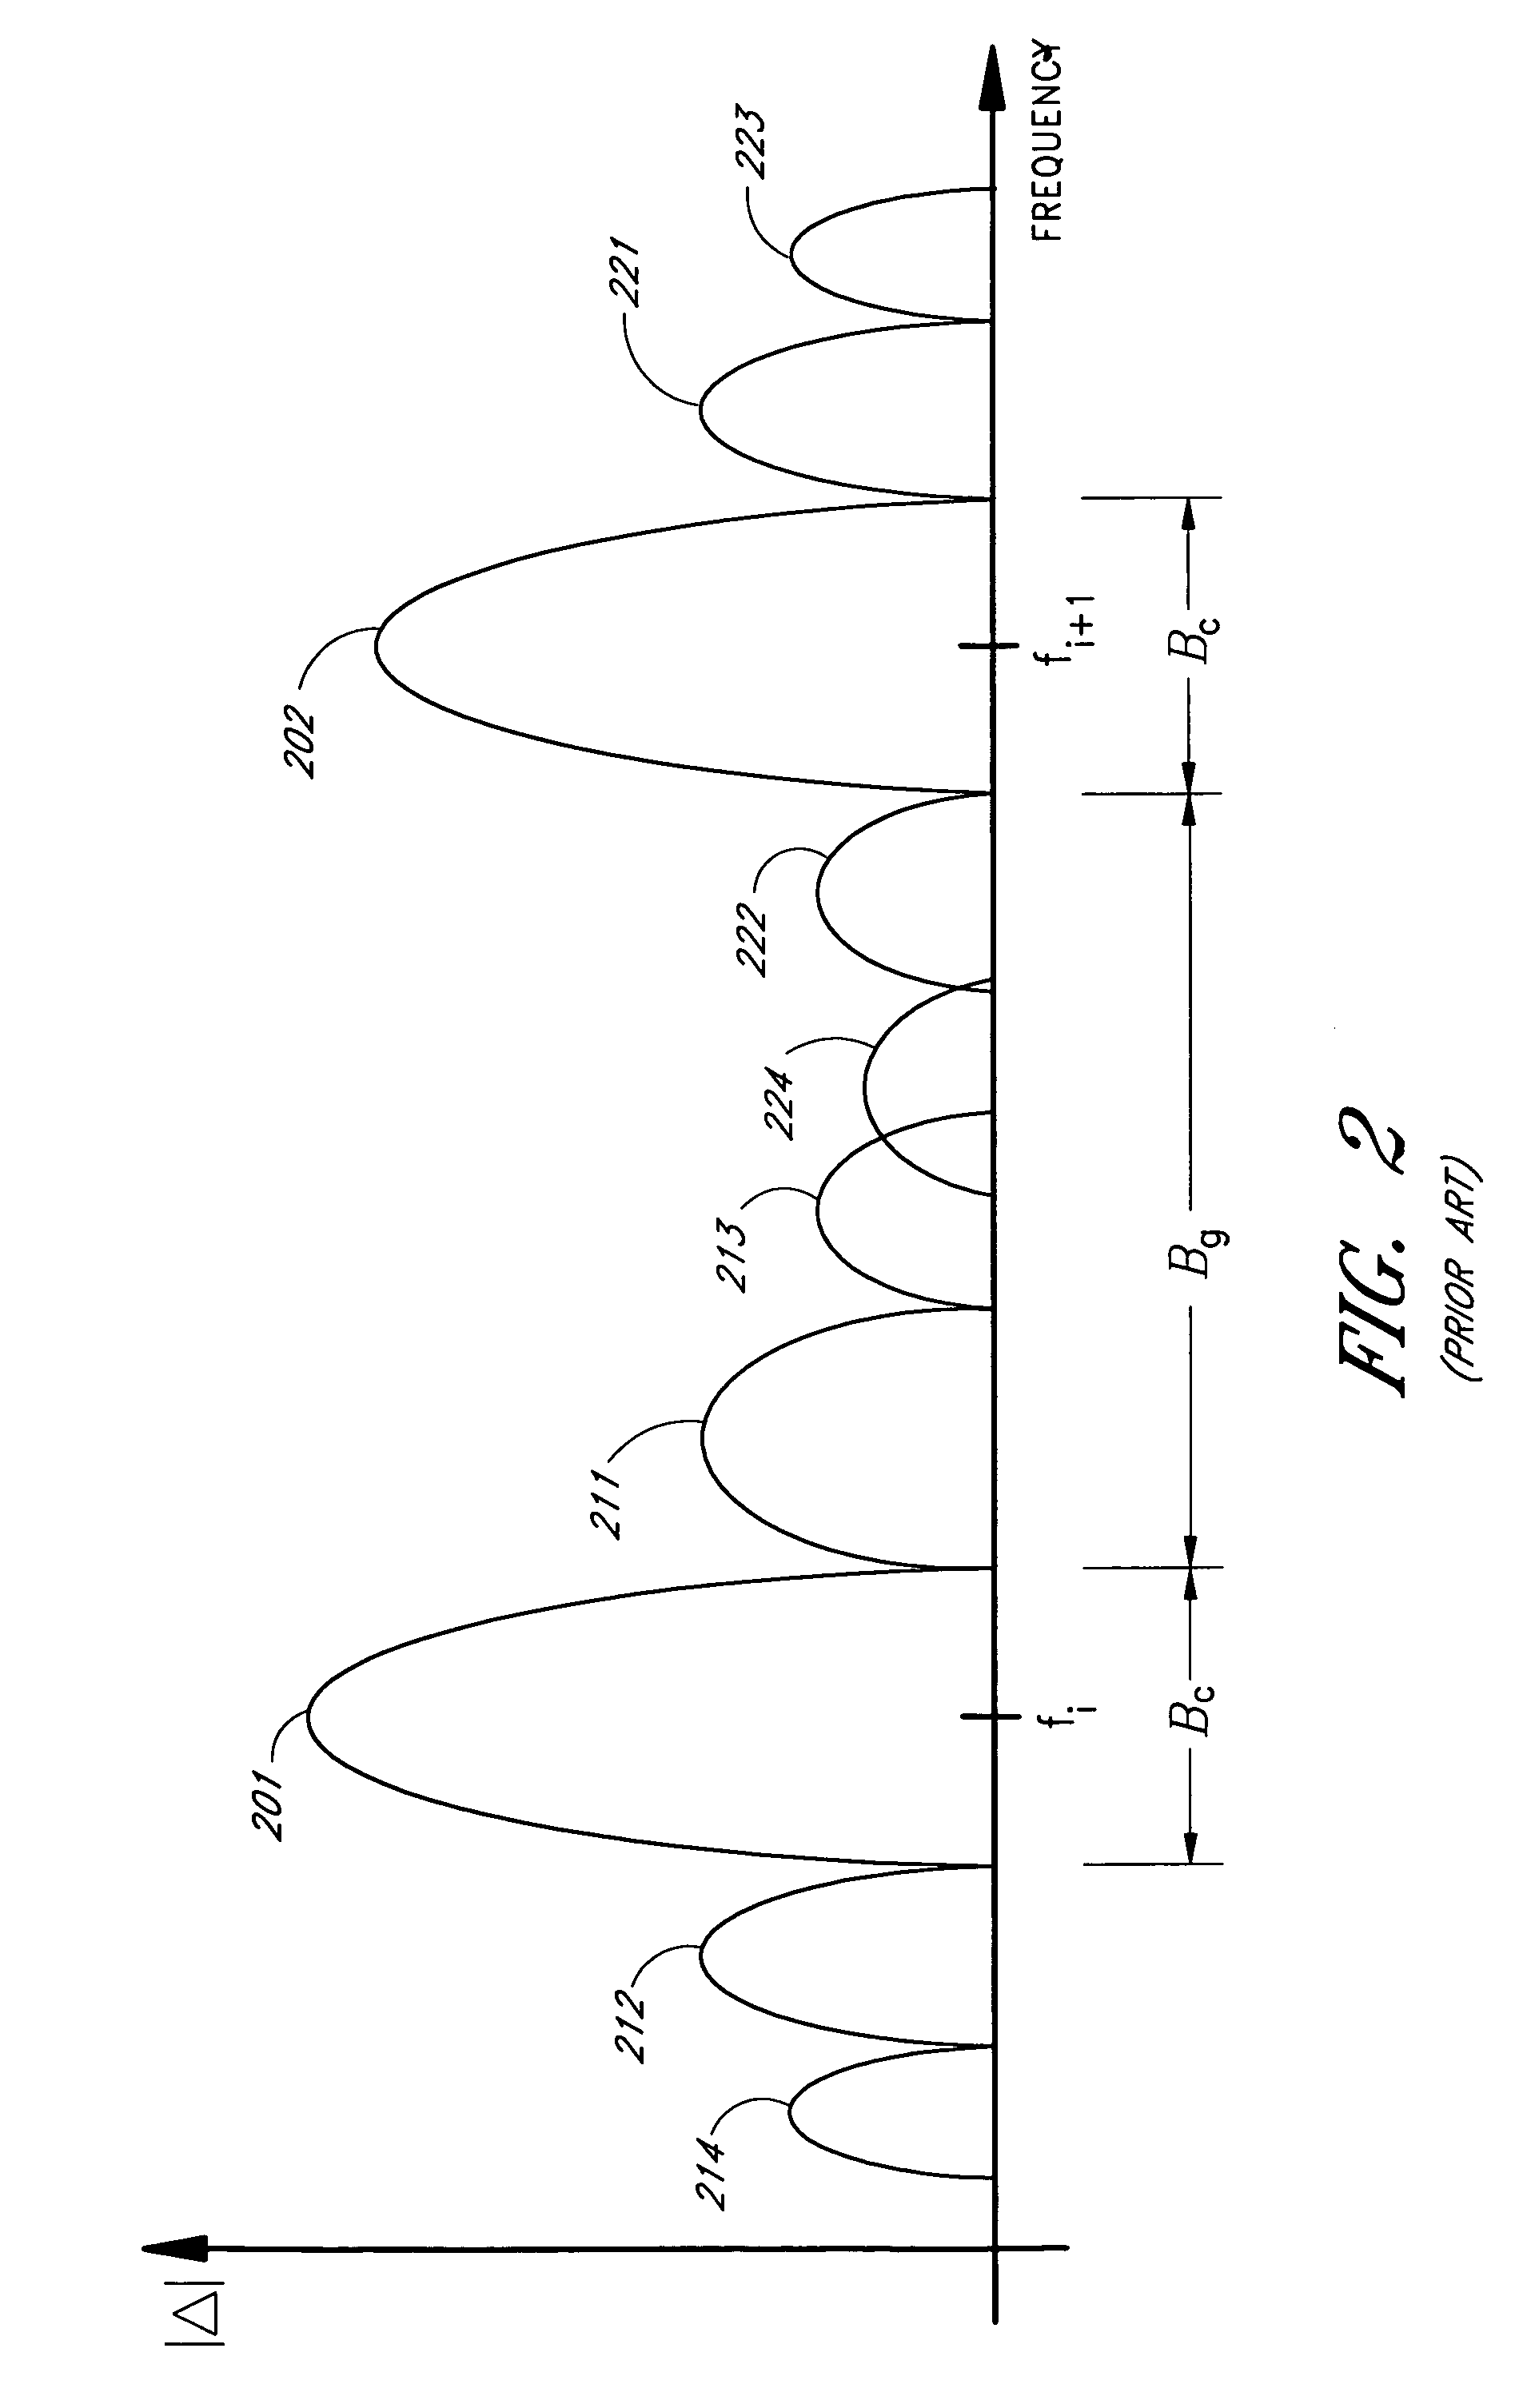 Sliding-window multi-carrier frequency division multiplexing system